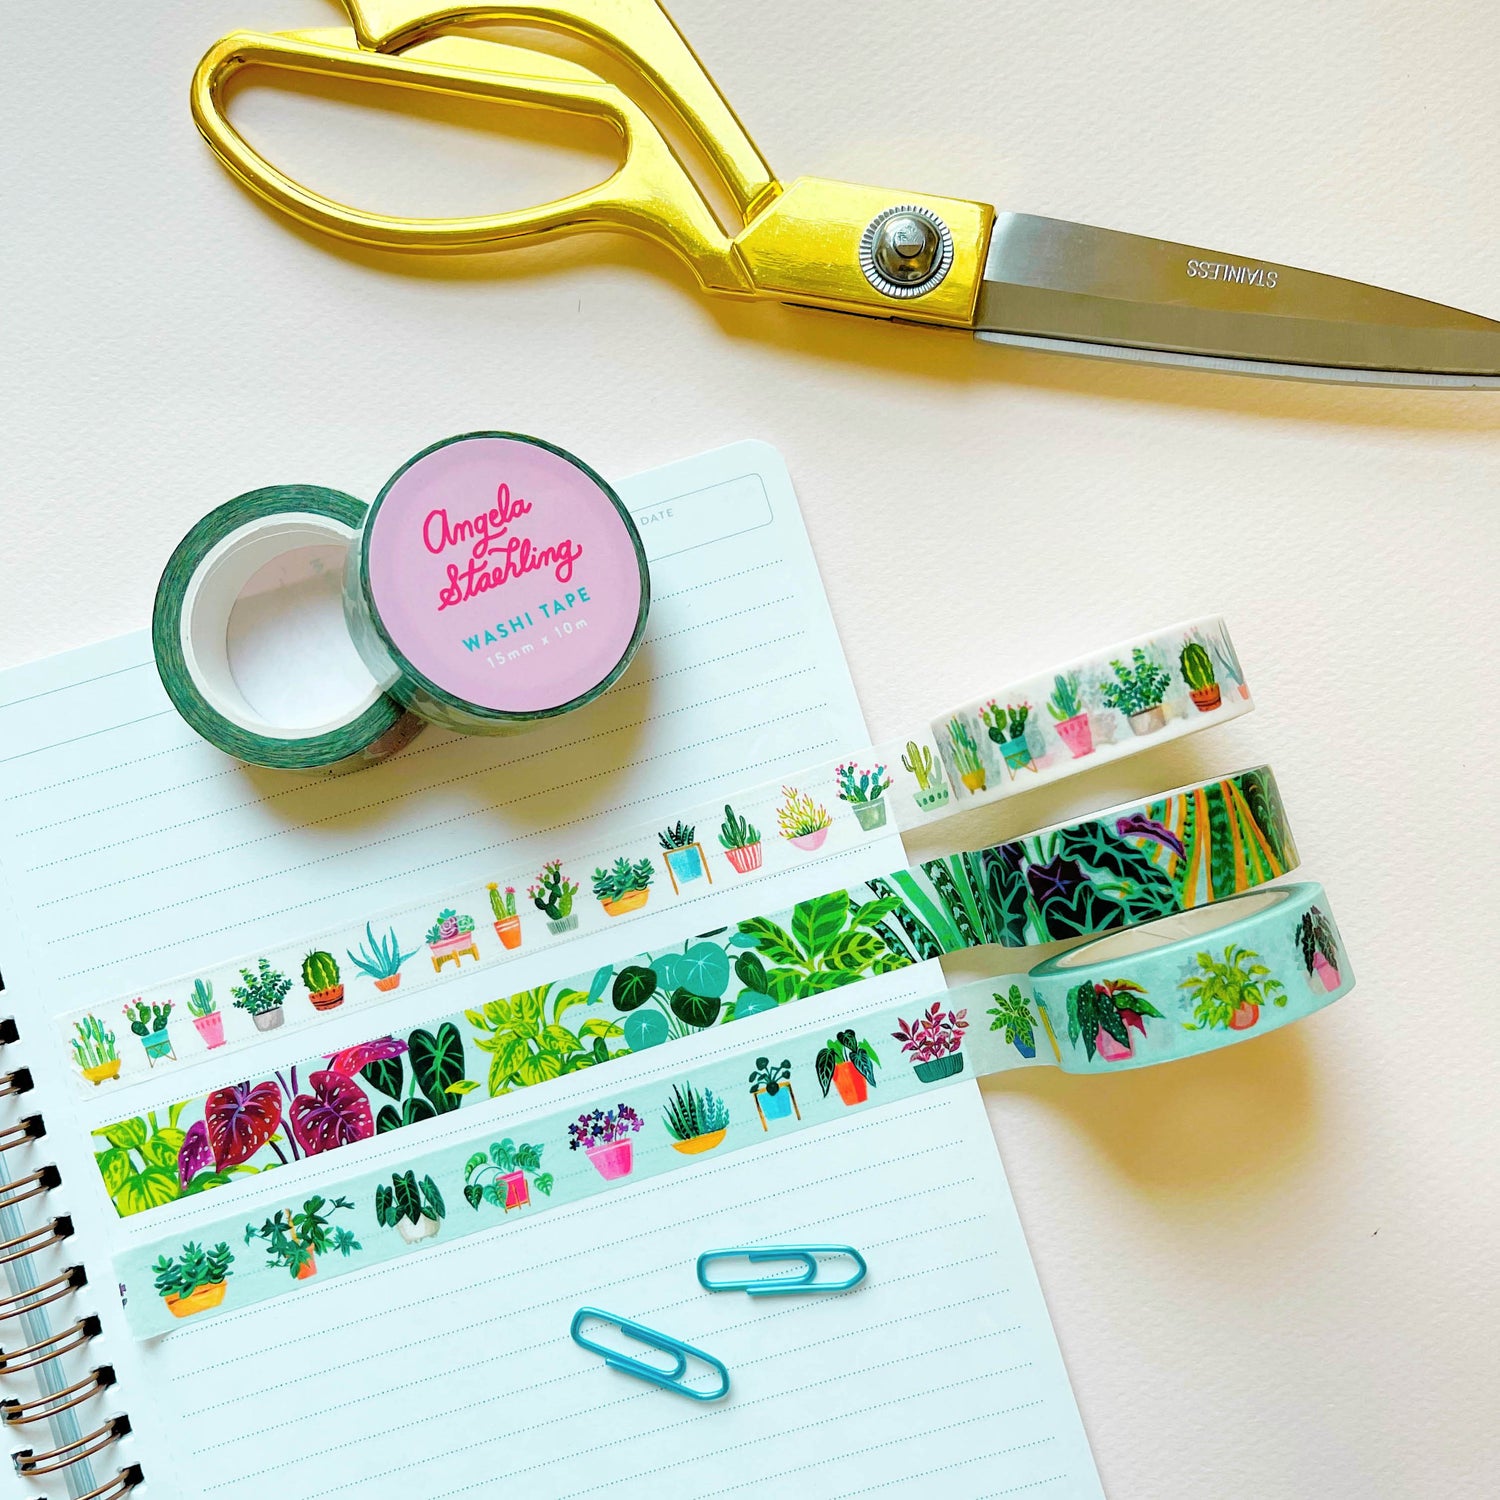 Three rolls of plant washi tape. One roll is Houseplant Washi Tape, one is Plant Pattern Washi Tape, one is Cactus Washi Tape. Shown with scissors and paperclips